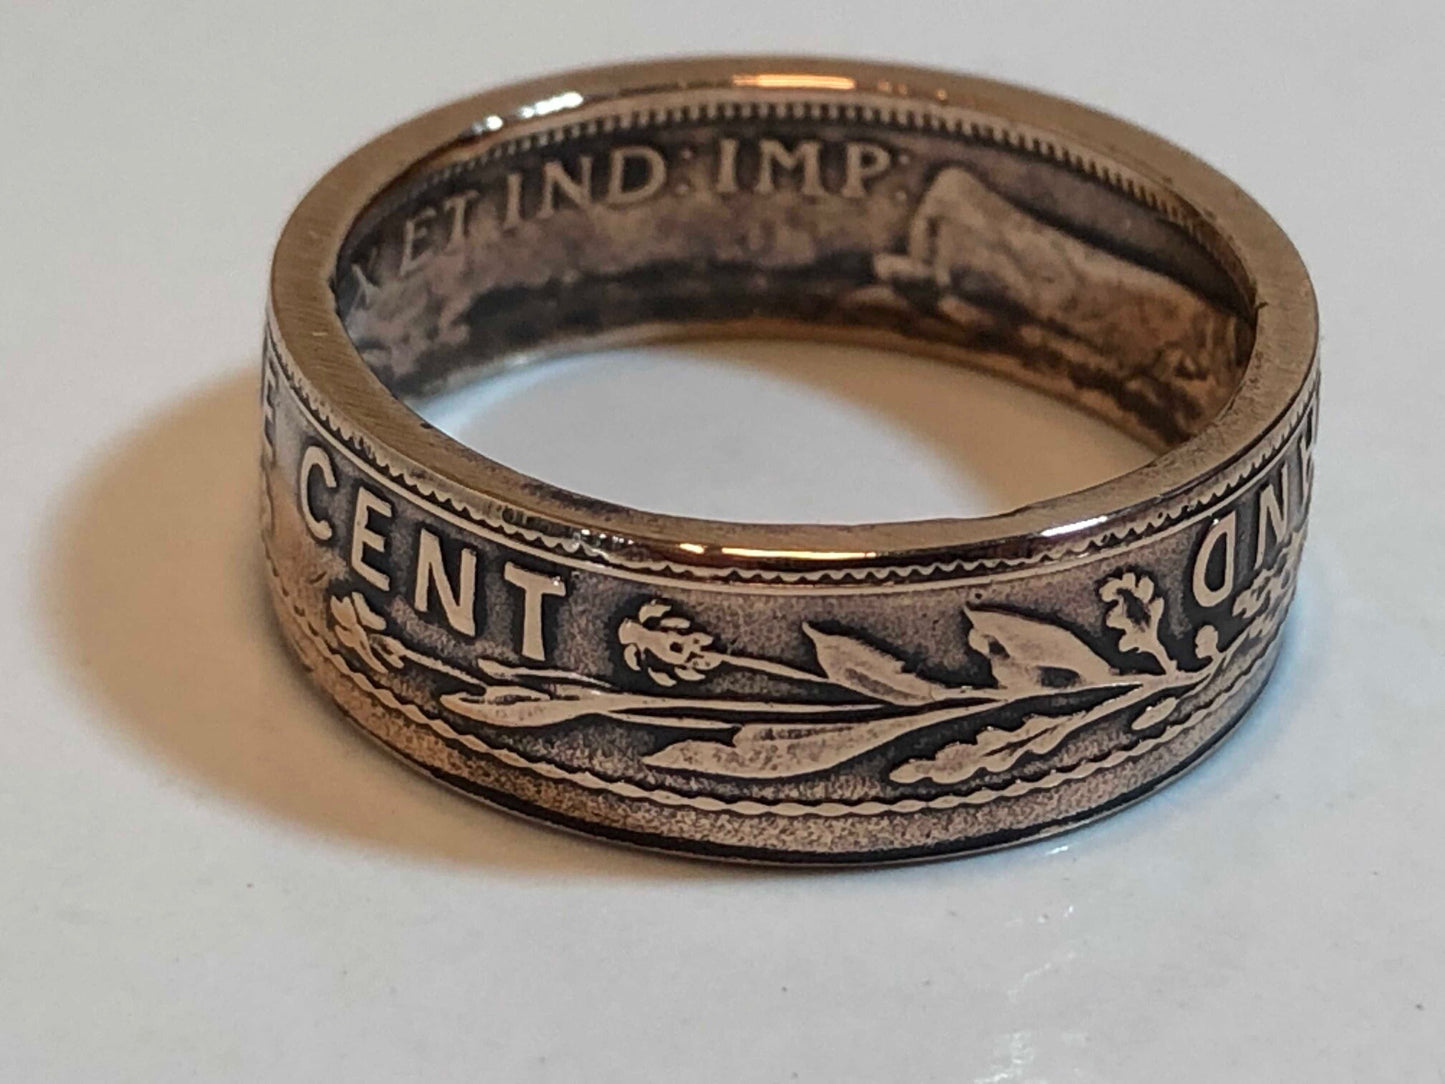 Canada NFLD Coin Ring Newfoundland Penny Canadian Ring Handmade Custom Ring Gift For Friend Coin Ring Gift For Him Her World Coin Collector